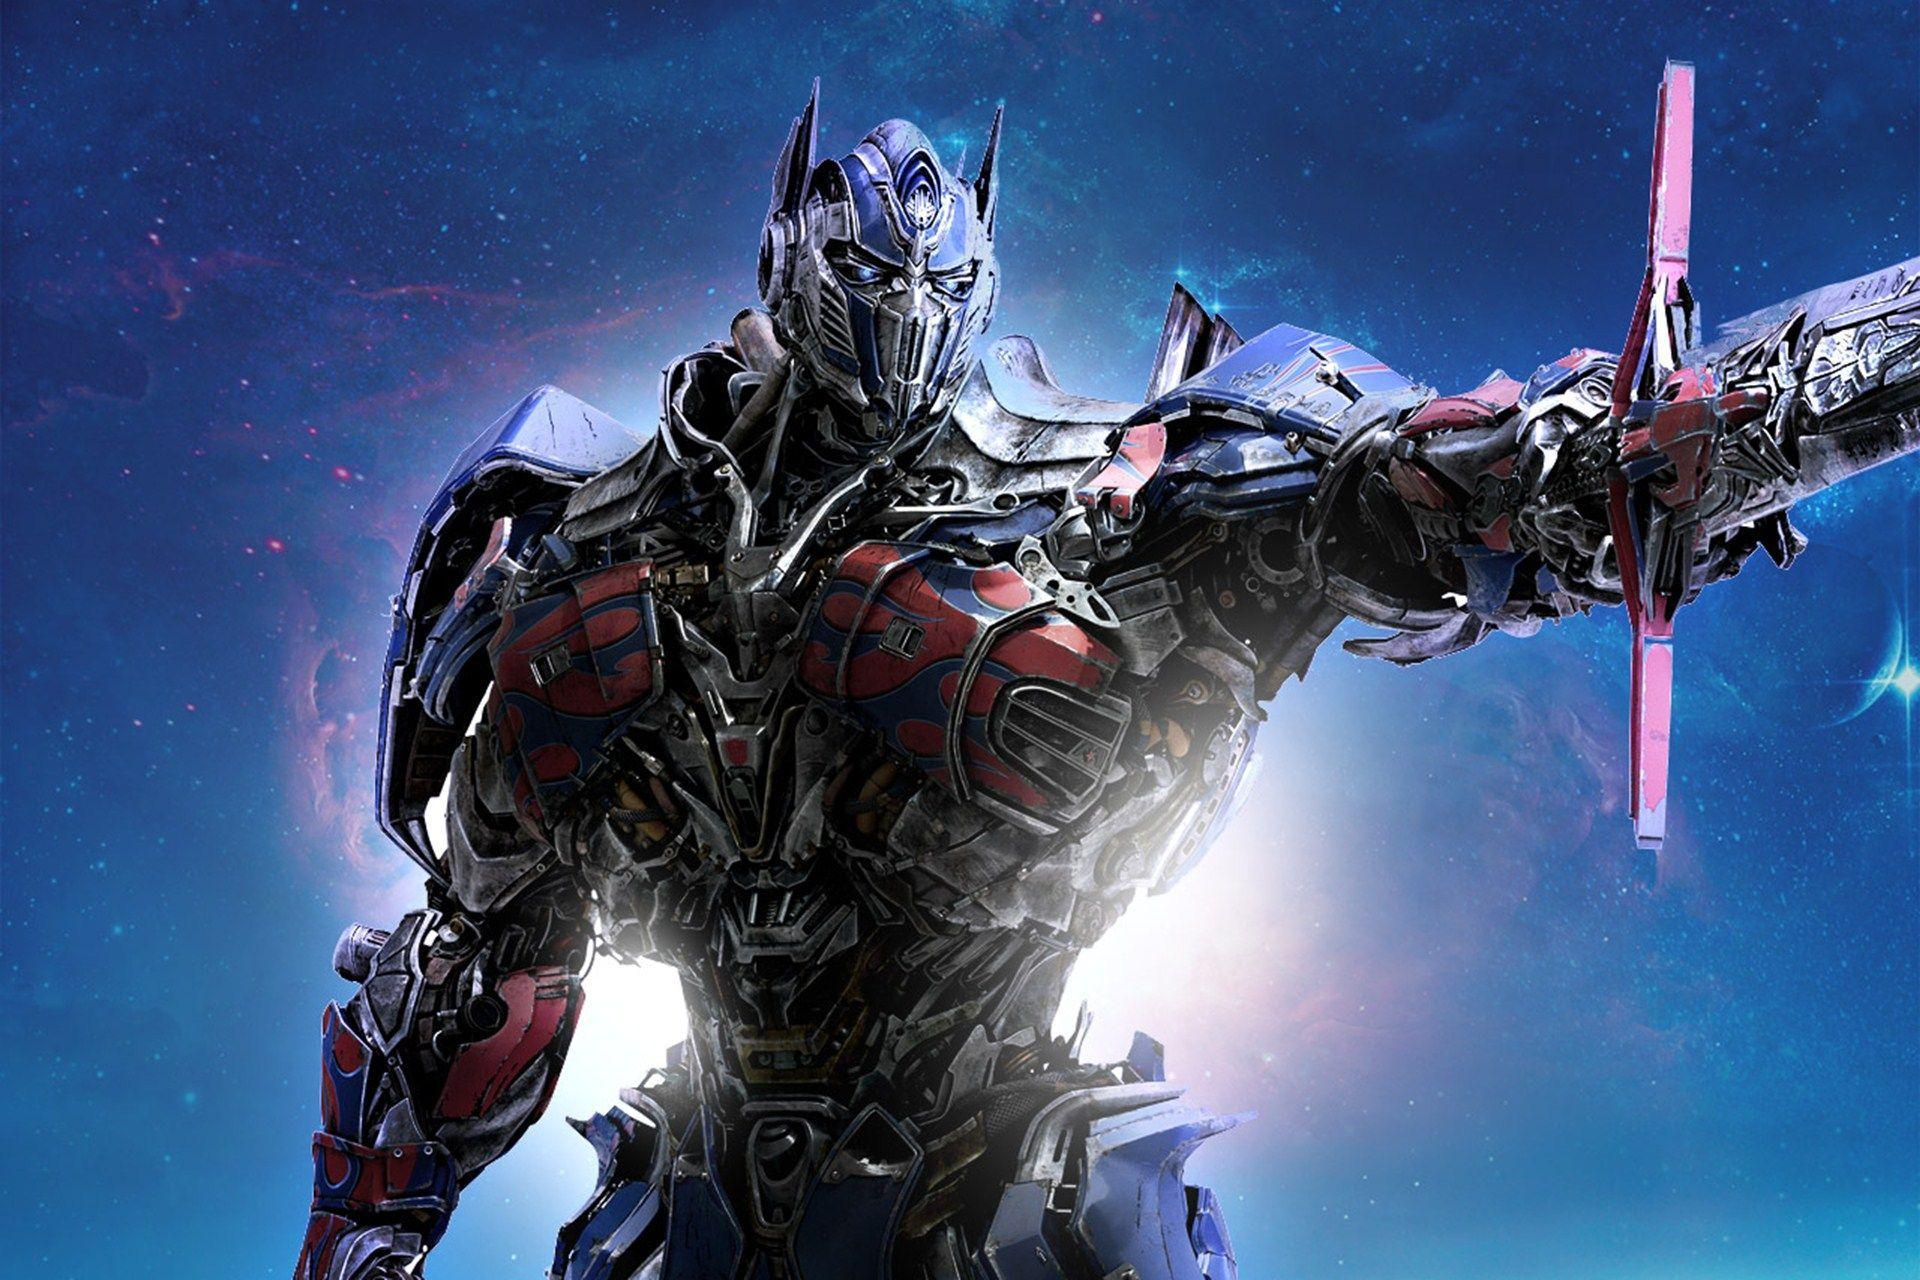 1920x1280 Transformers 5 Wallpapers Top Free Transformers 5 Backgrounds